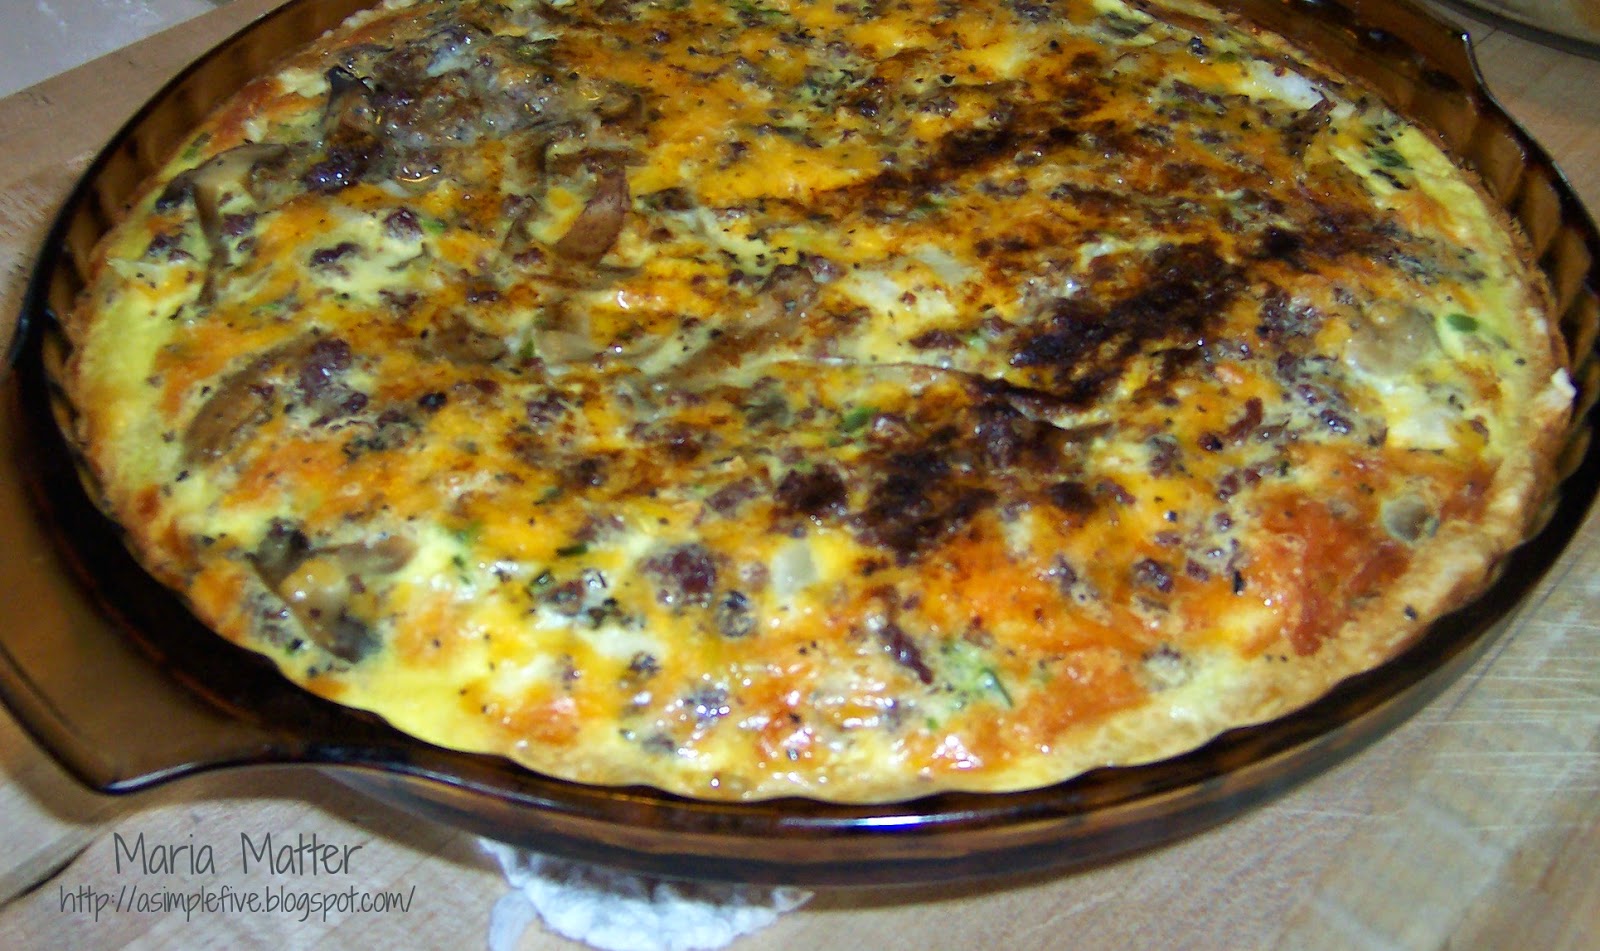 Five Simple Things: Sausage-Cheddar Quiche - printable recipe